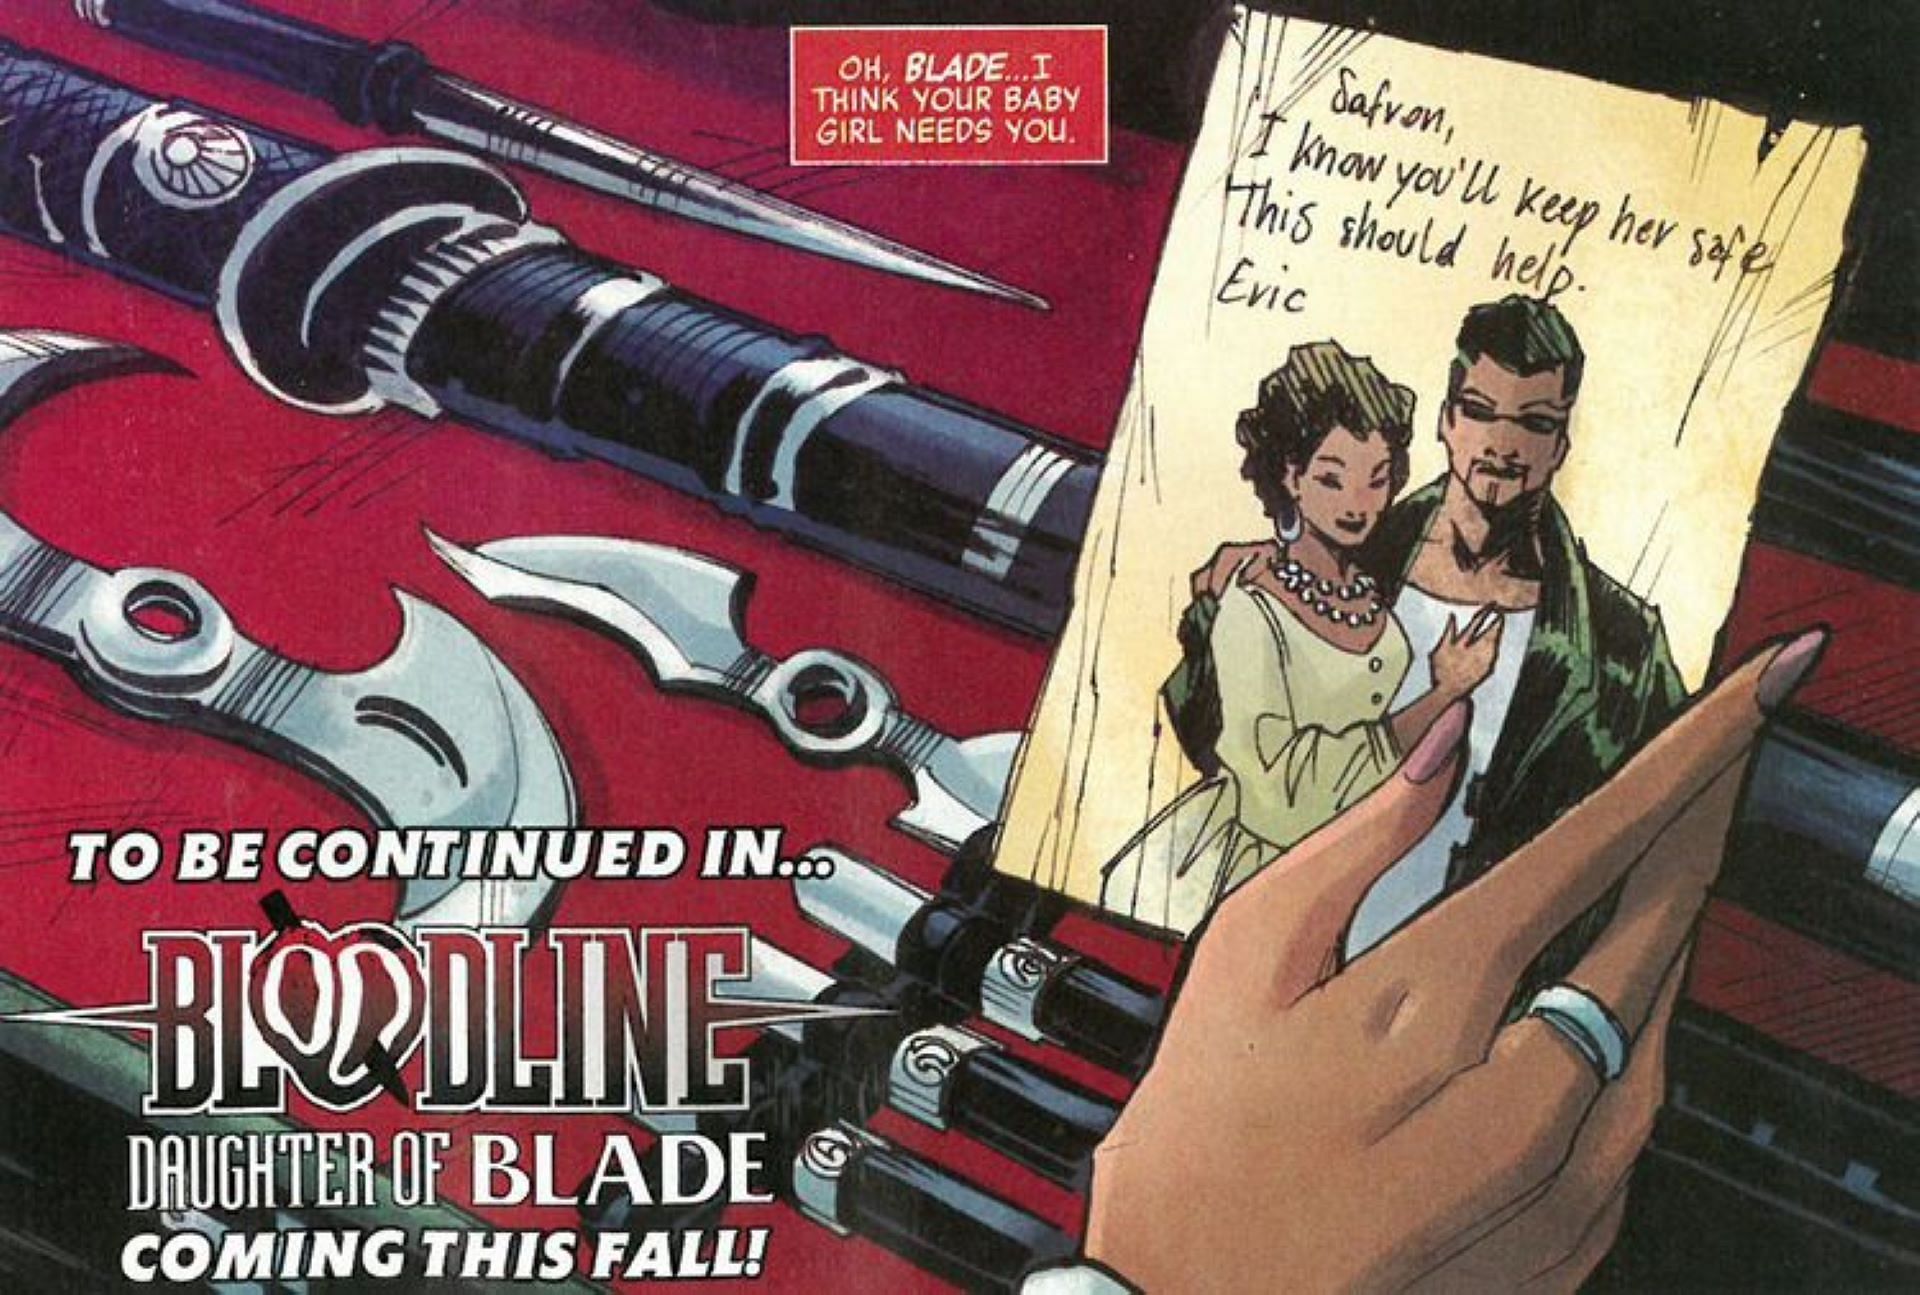 Brielle is the daughter of Blade and Safron (Image via Marvel)